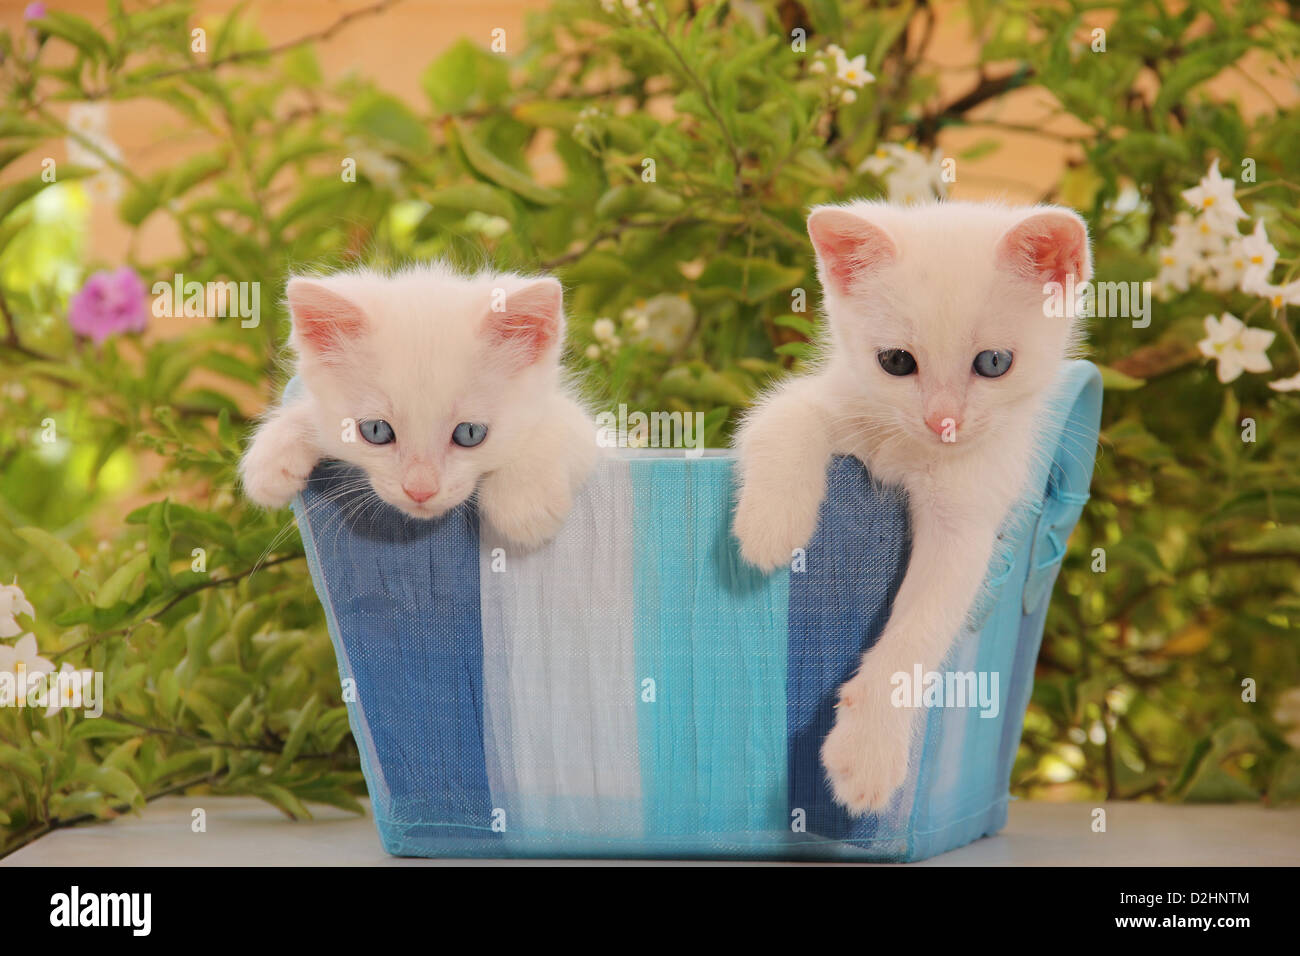 Domestic Cat. Two white kittens (43 days old) in a blue basket with a flowering Blue Potato Bush in background Stock Photo